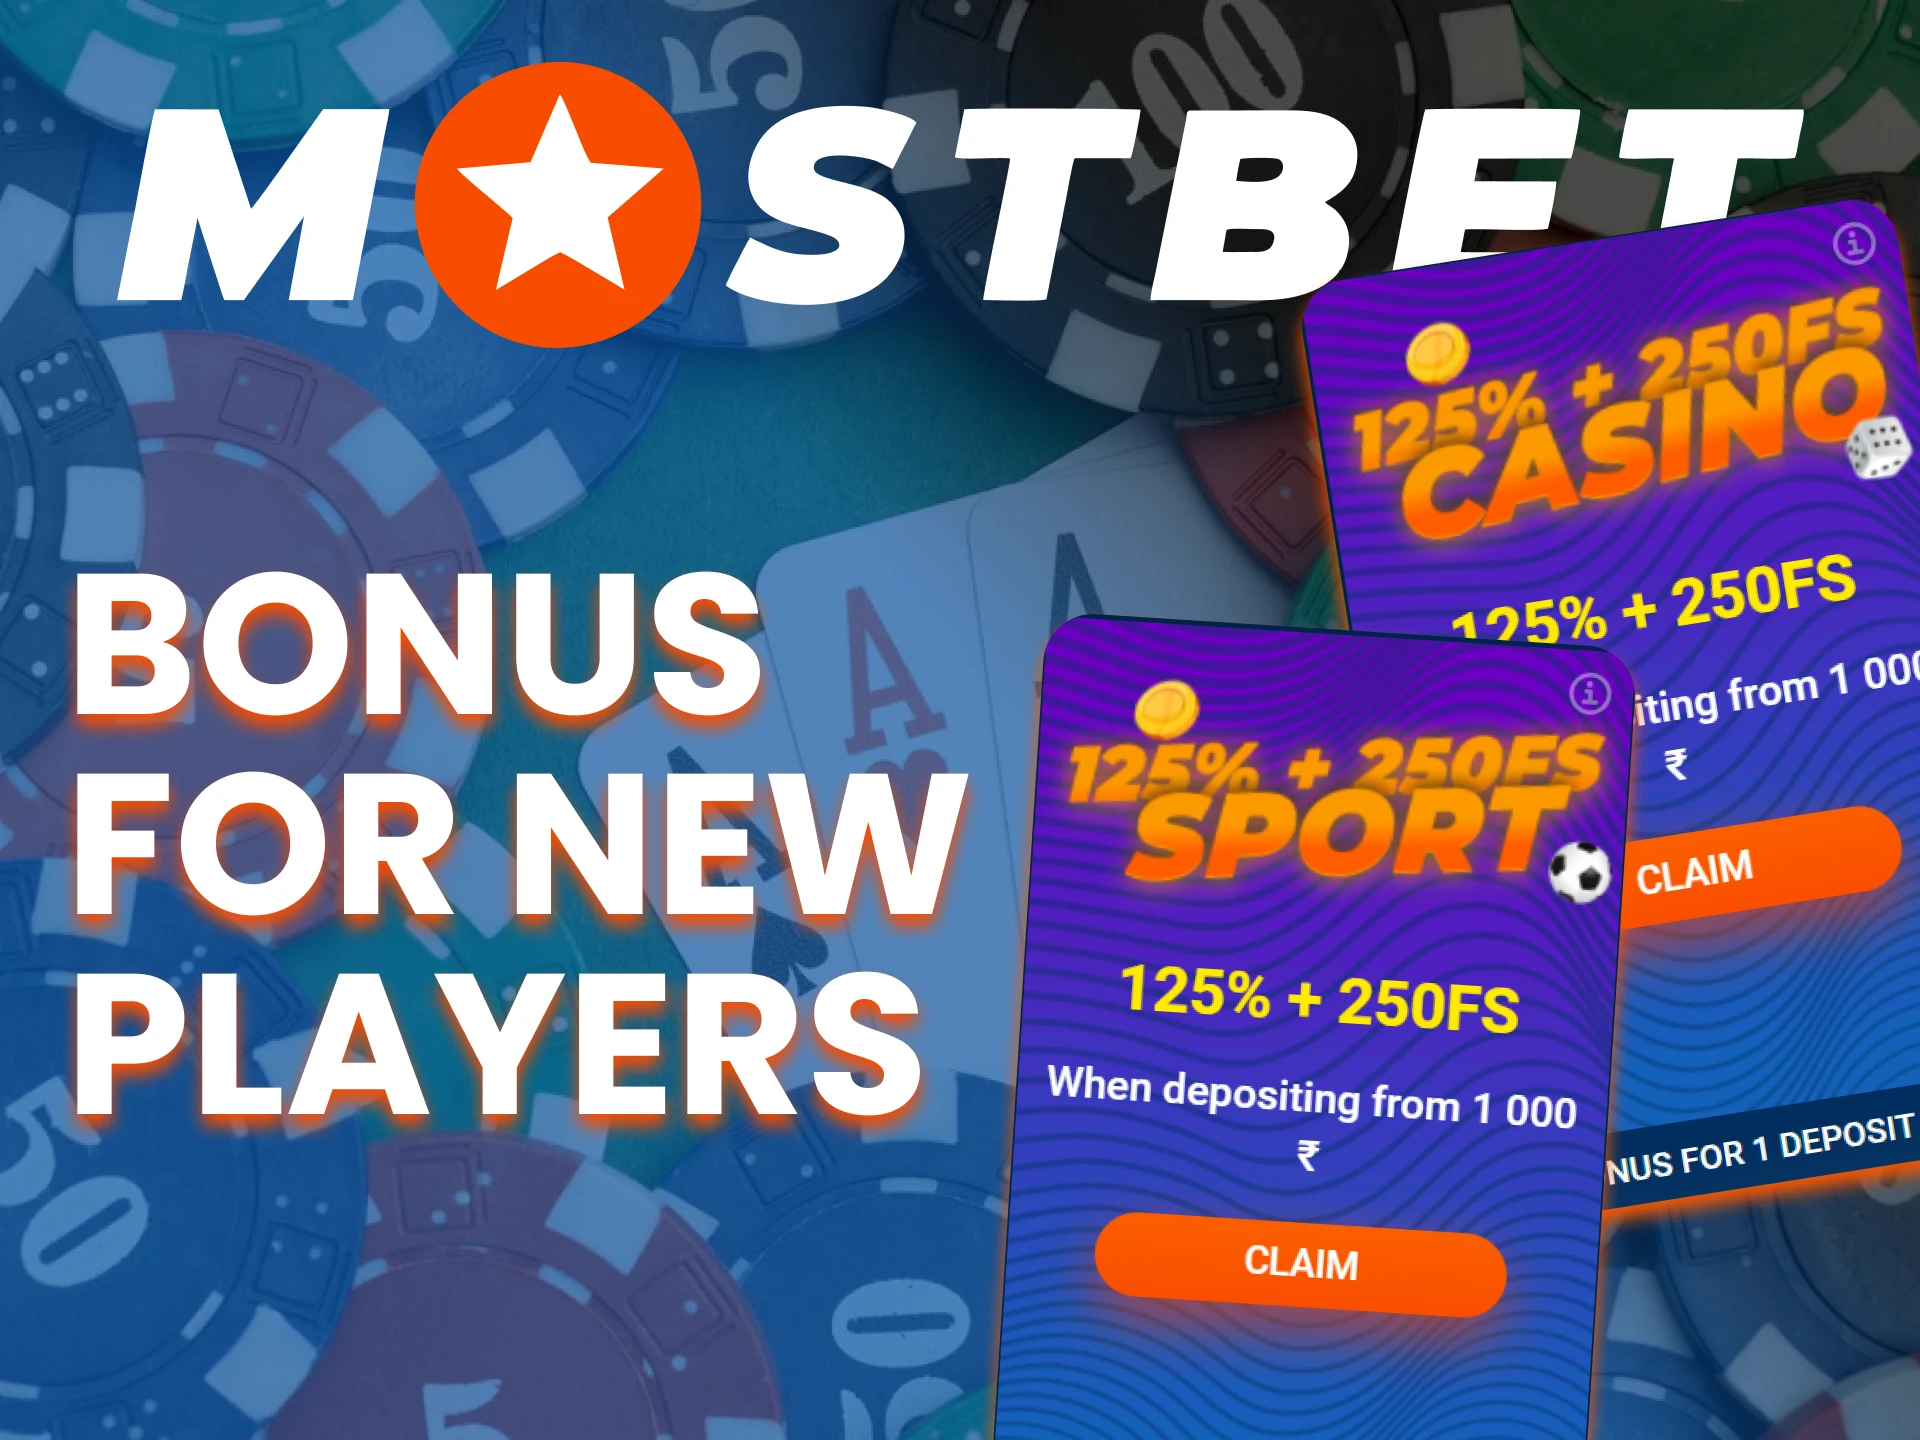 At Mostbet app get a special welcome bonus for new players.